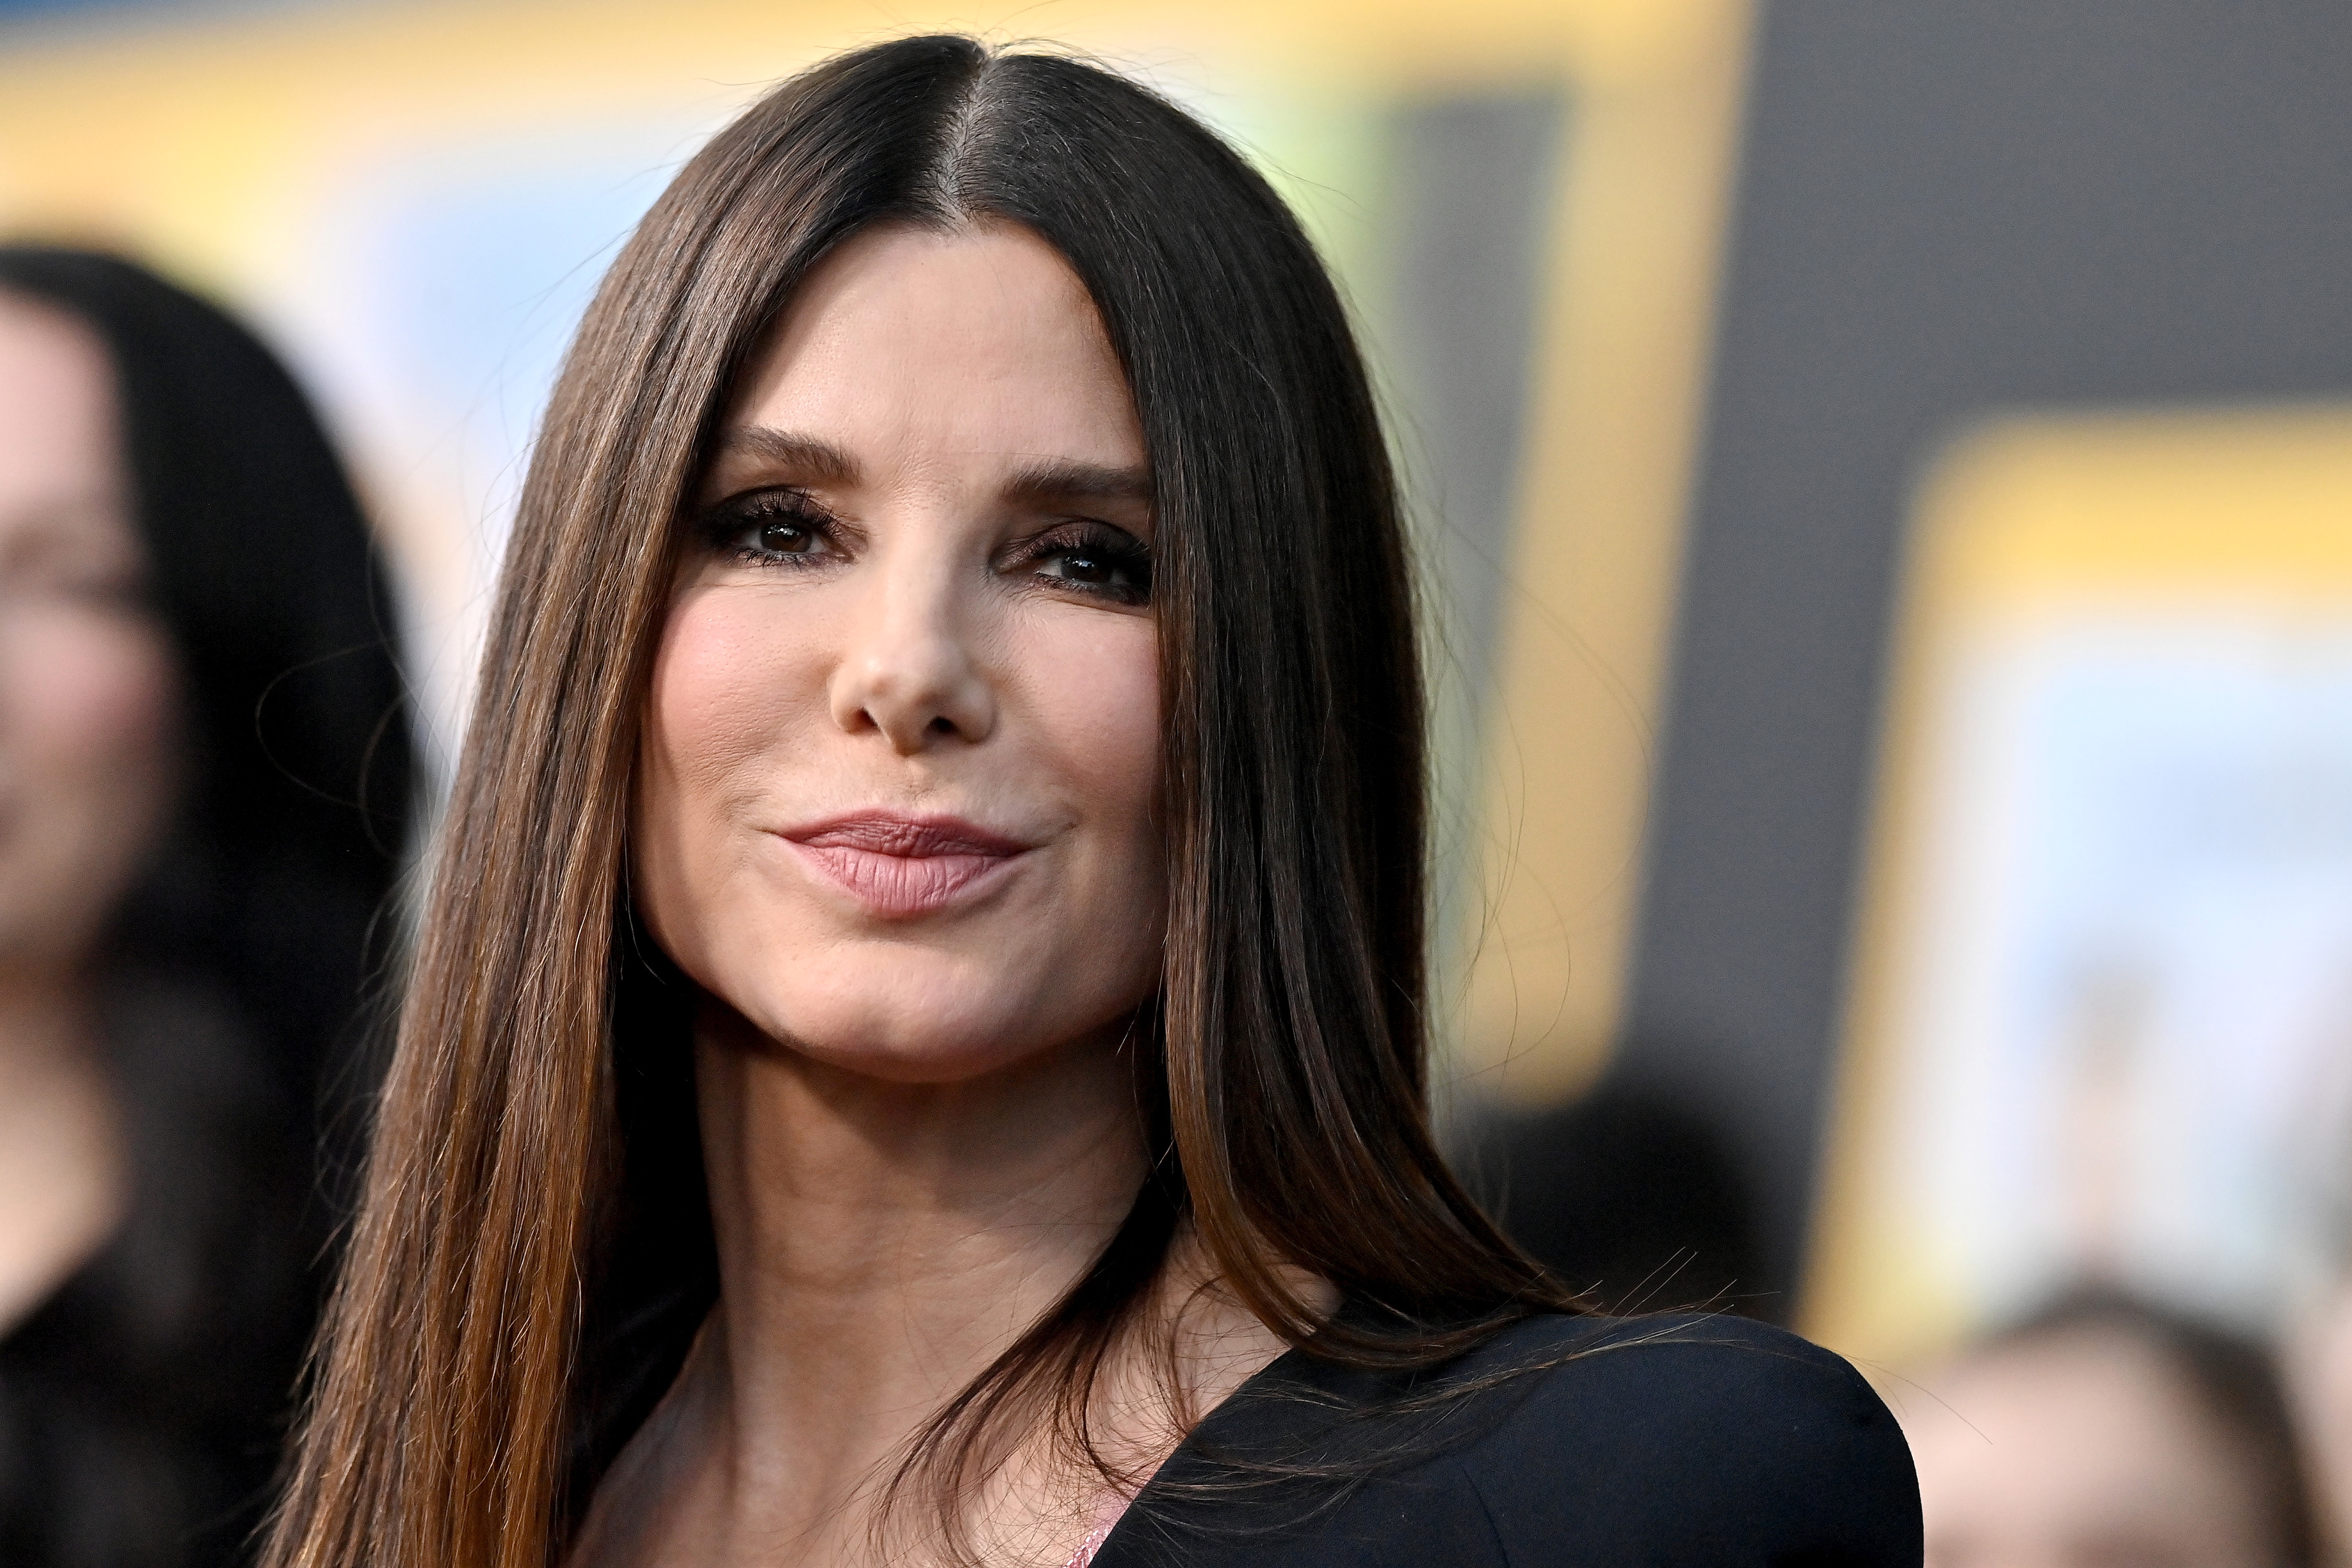 Sandra Bullock at the Los Angeles premiere of "The Lost City" on March 21, 2022, in Los Angeles, California | Source: Getty Images